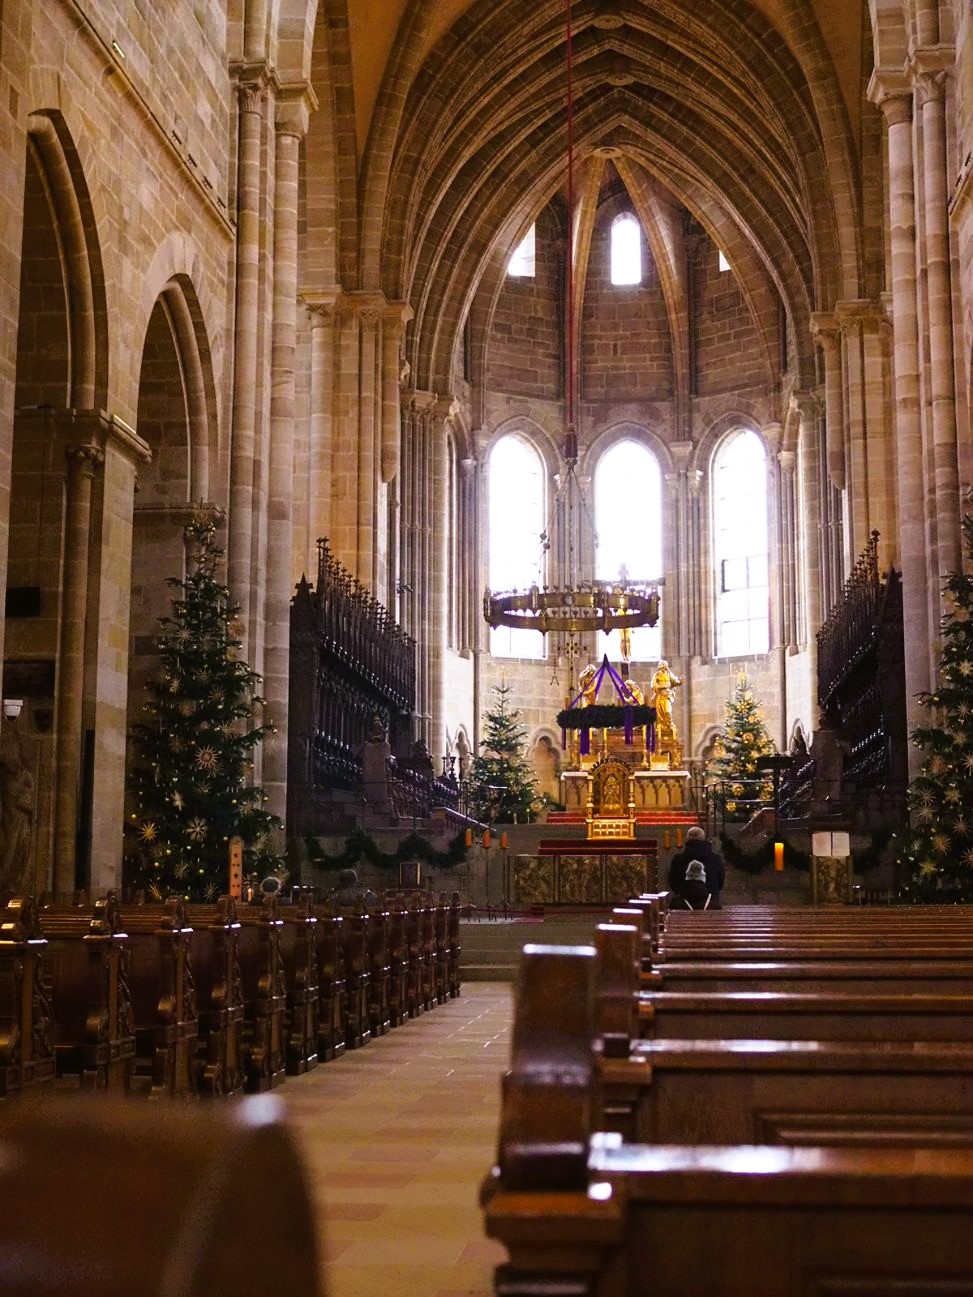 The interior of a cathedral is shown decorated for Christmas with decorations and multiple Christmas trees, light glistens off the pews, a lone visitor stands at the front of the church before the arched windows.